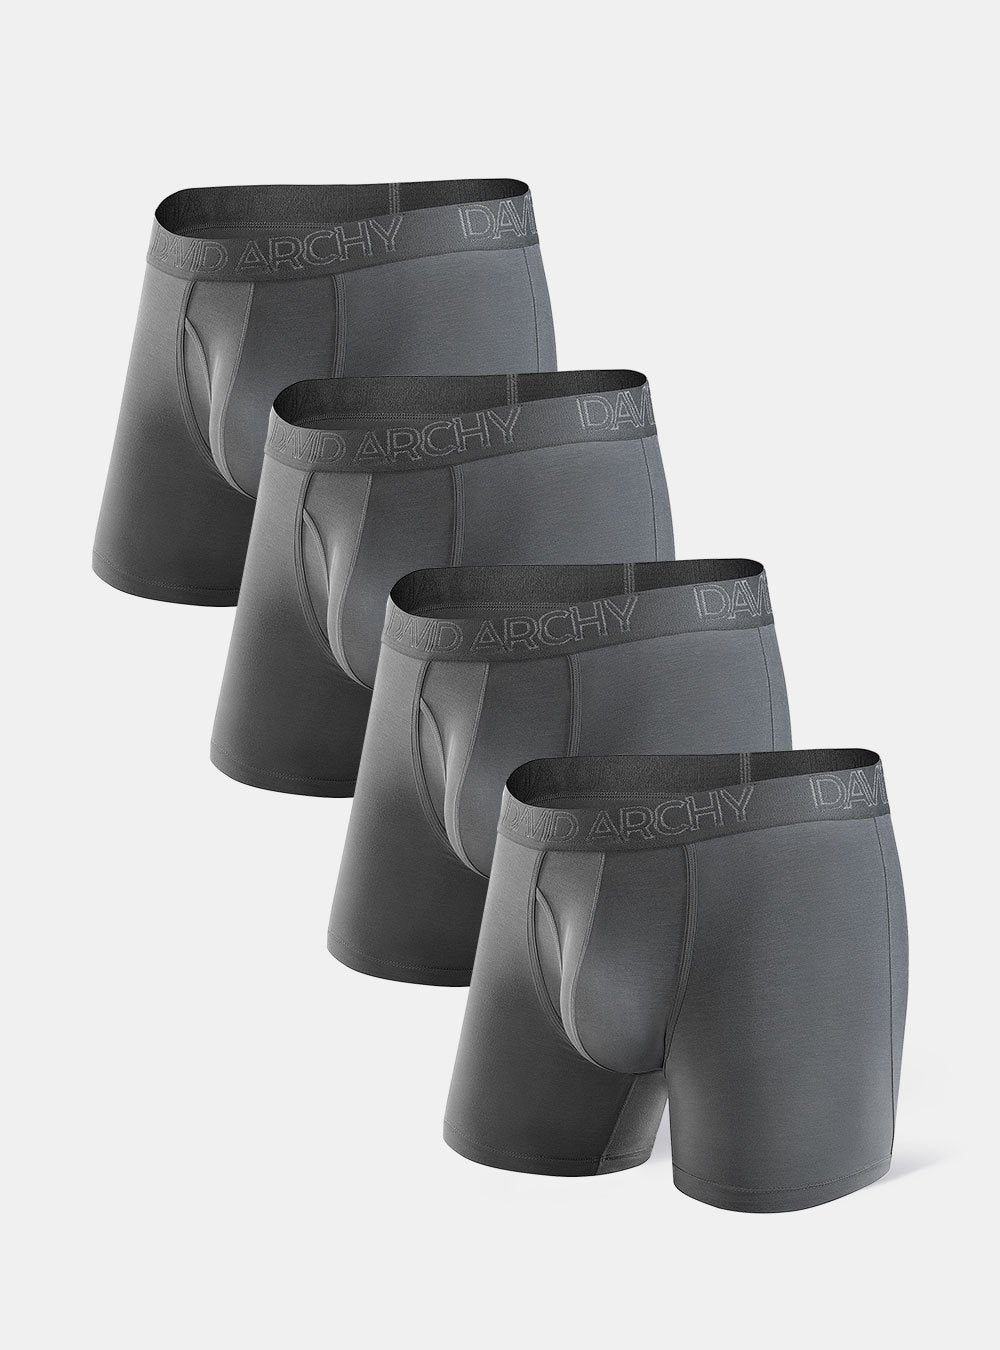  Mens 4 Pack Underwear Ultra Soft Comfy Breathable Bamboo  Rayon Trunks No Fly